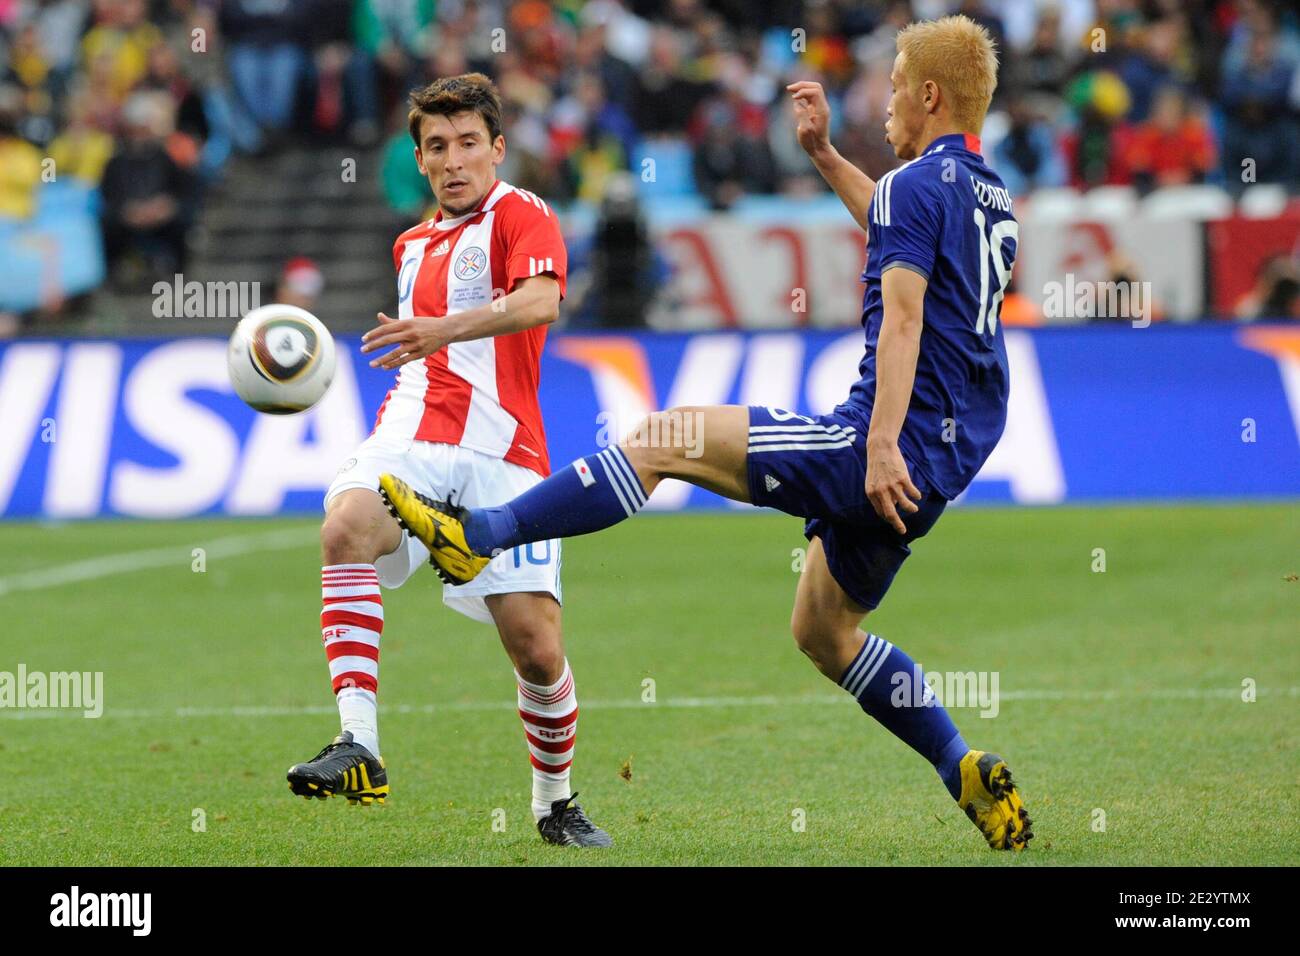 Paraguay's Edgar Benitez and Japan's Keisuke Honda fight for the ball during the 2010 FIFA World Cup South Africa 1/8 of final Soccer match, Paraguay vs Japan at Loftus Versfeld football stadium in Pretoria, South Africa on June 29, 2010. Paraguay won 0-0 (5p to 3 after penalties). Photo by Henri Szwarc/ABACAPRESS.COM Stock Photo